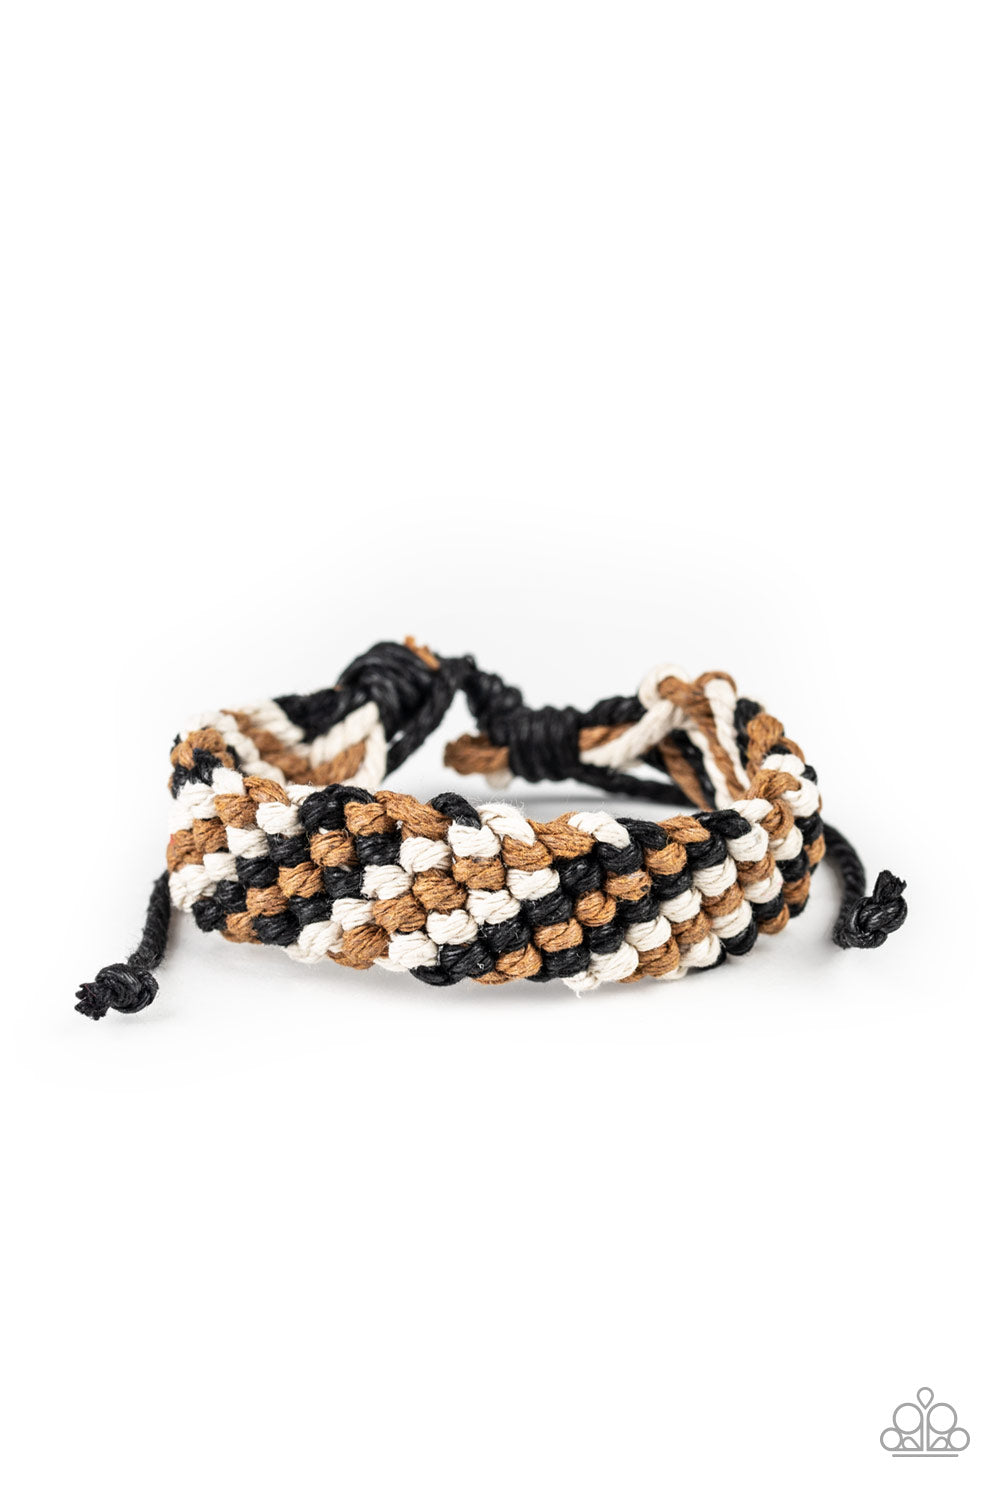 WEAVE NO TRACE - BLACK TAN AND WHITE WOVEN DRAW STRING URBAN BRACELET